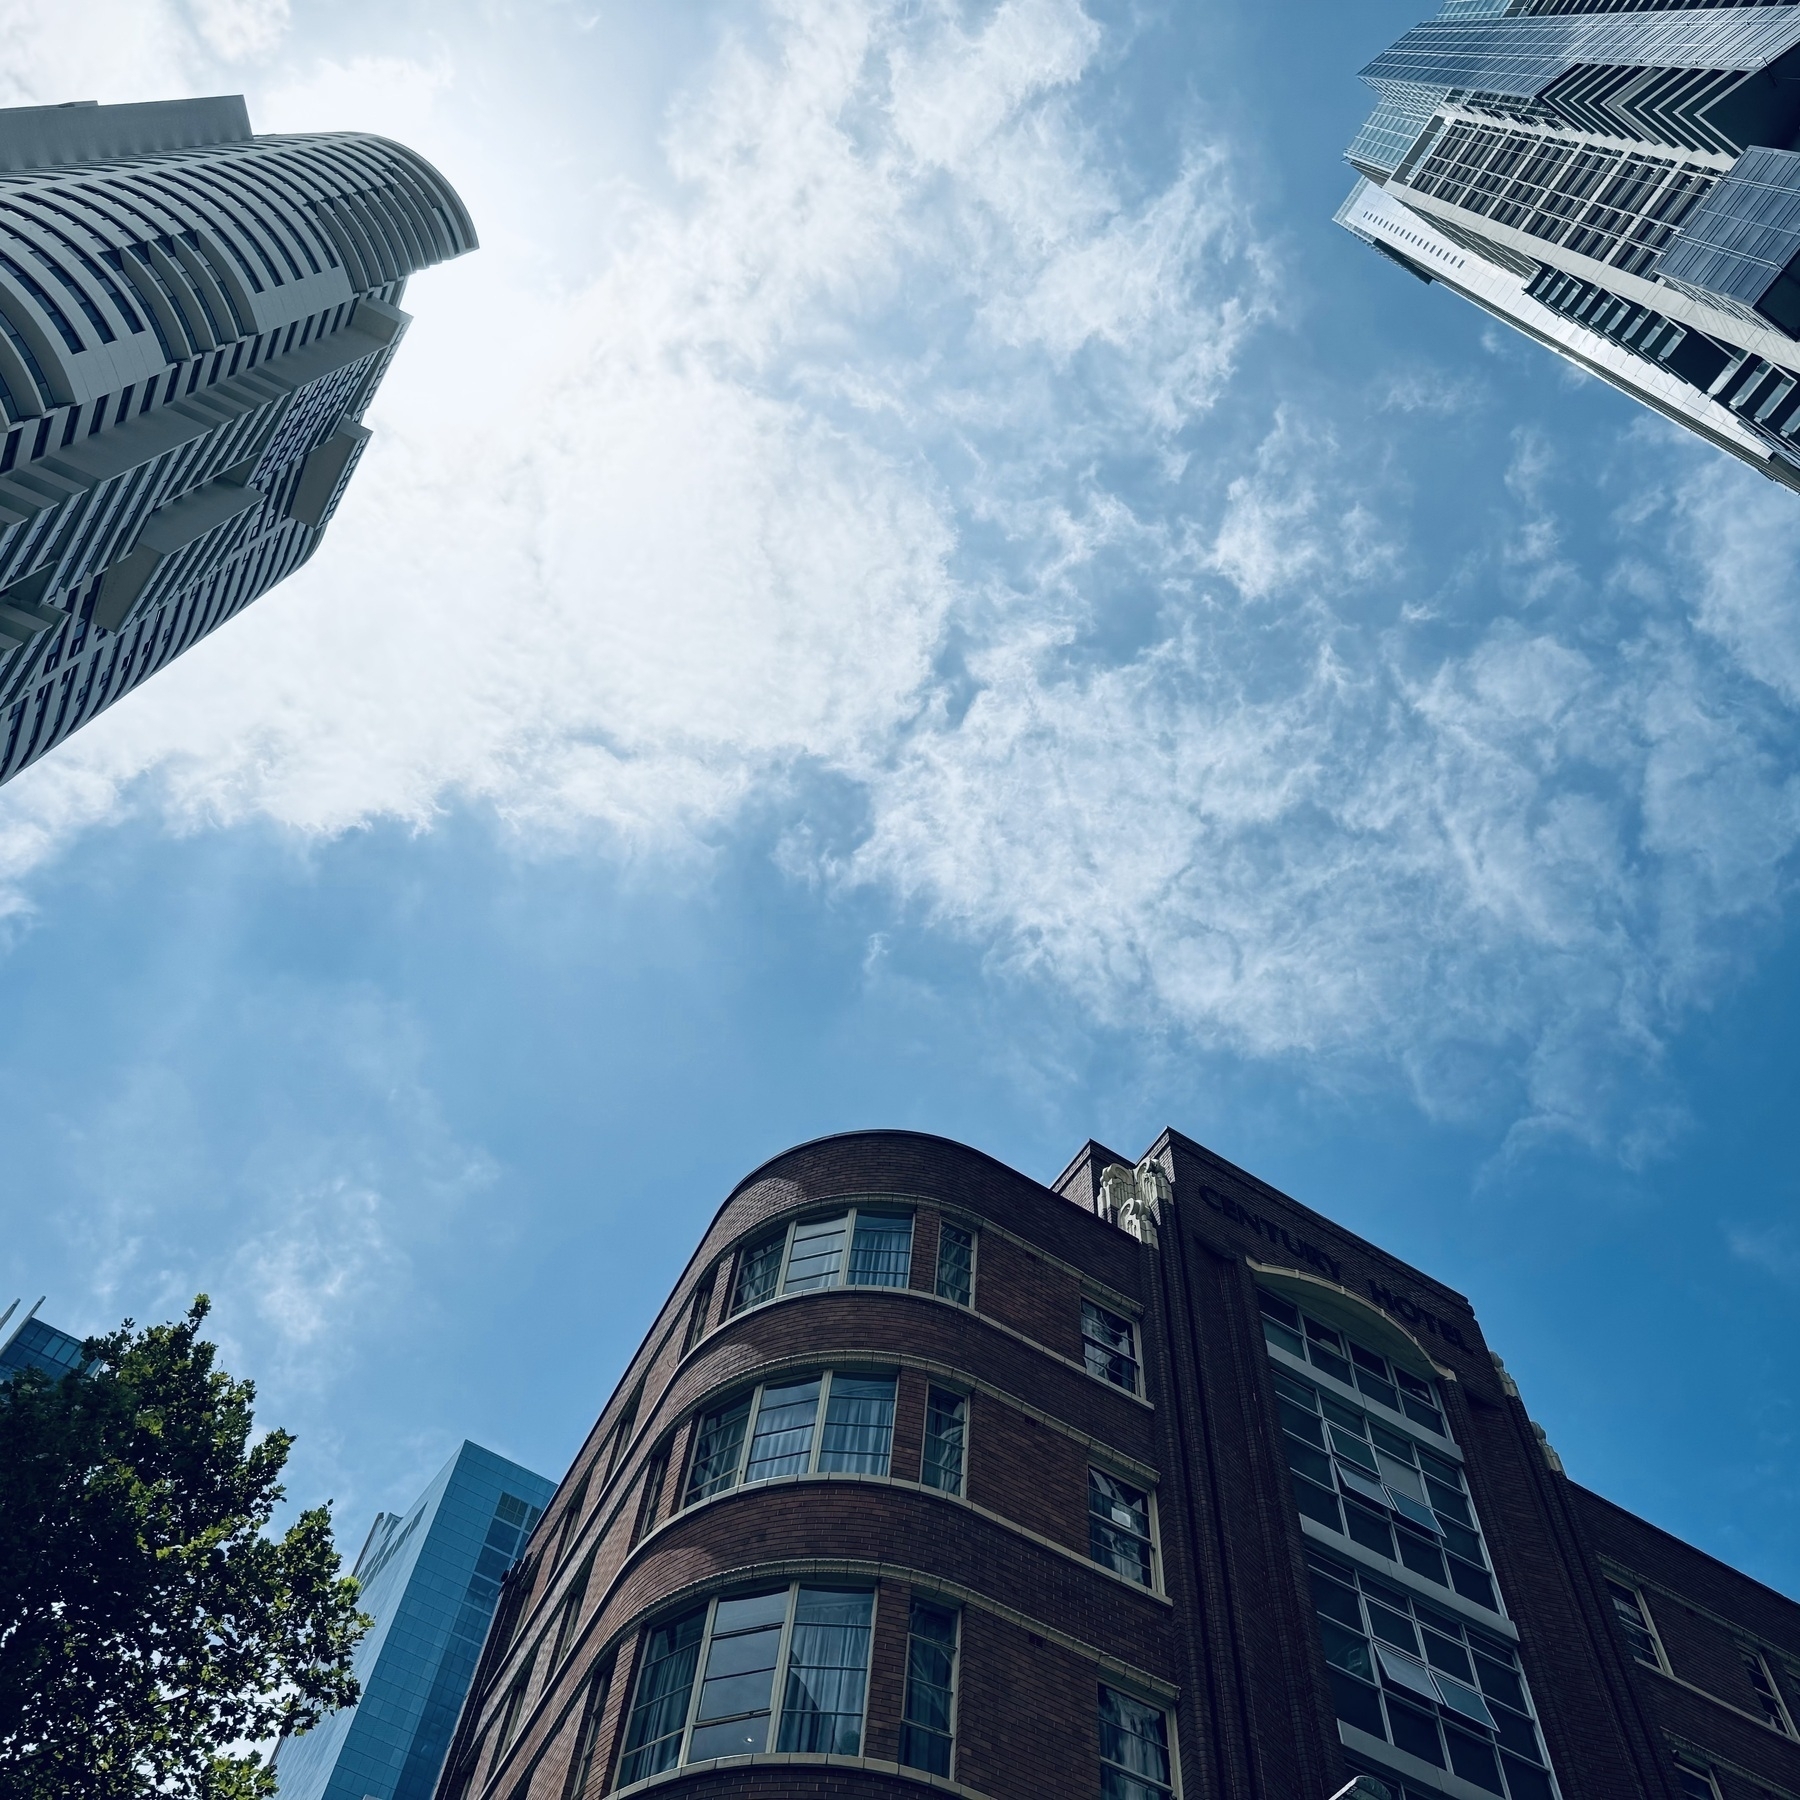 Looking up at a blue sky with white clouds, while three buildings protrude in from the edges of the photo.